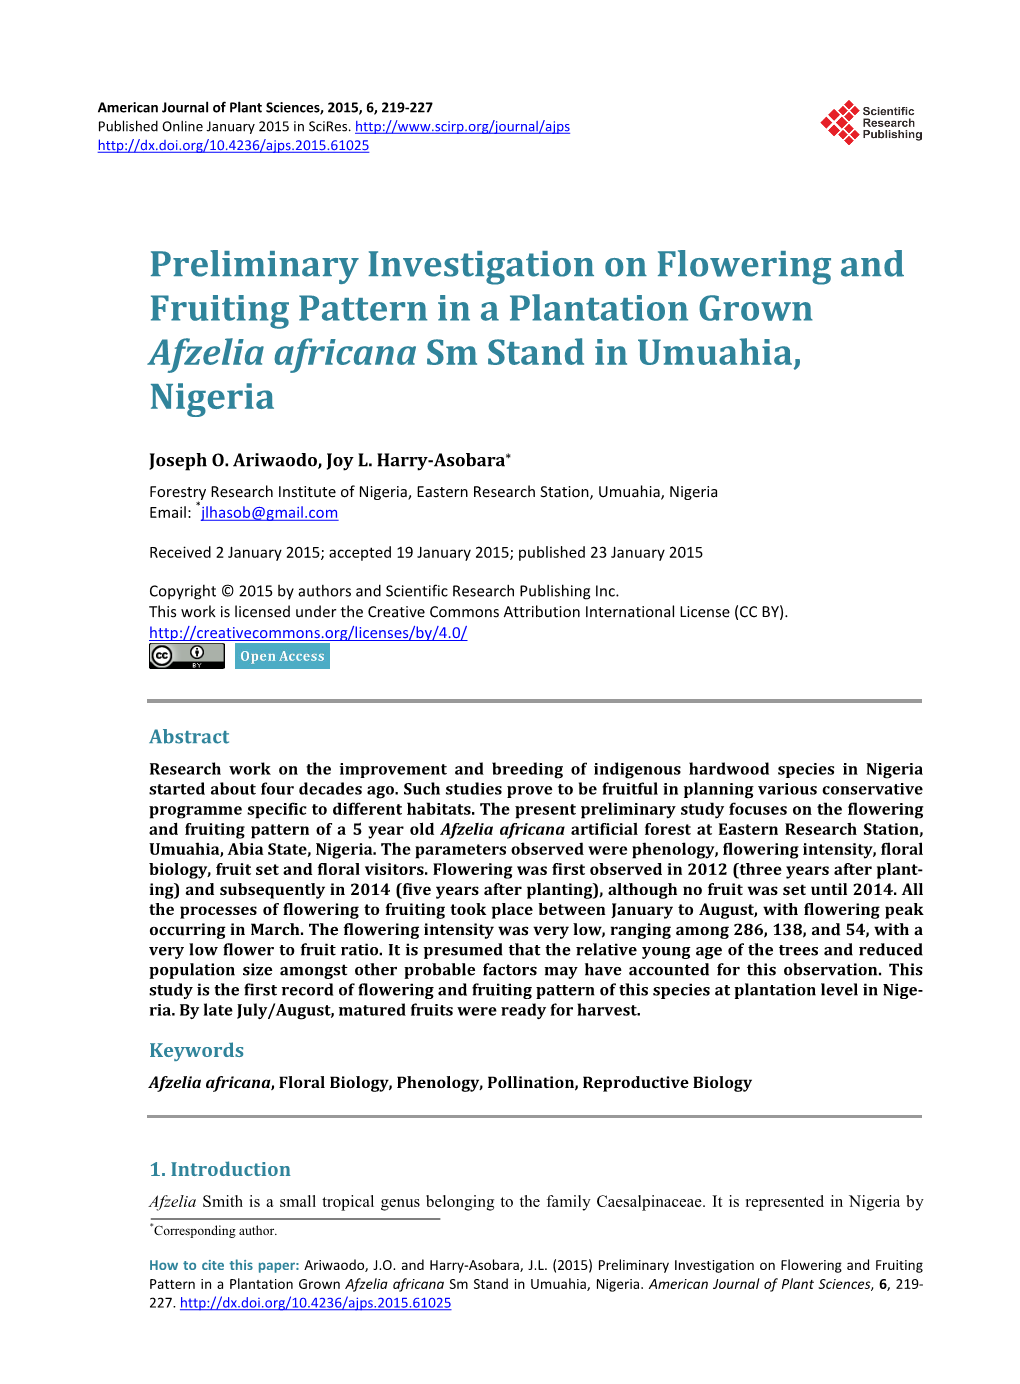 Preliminary Investigation on Flowering and Fruiting Pattern in a Plantation Grown Afzelia Africana Sm Stand in Umuahia, Nigeria